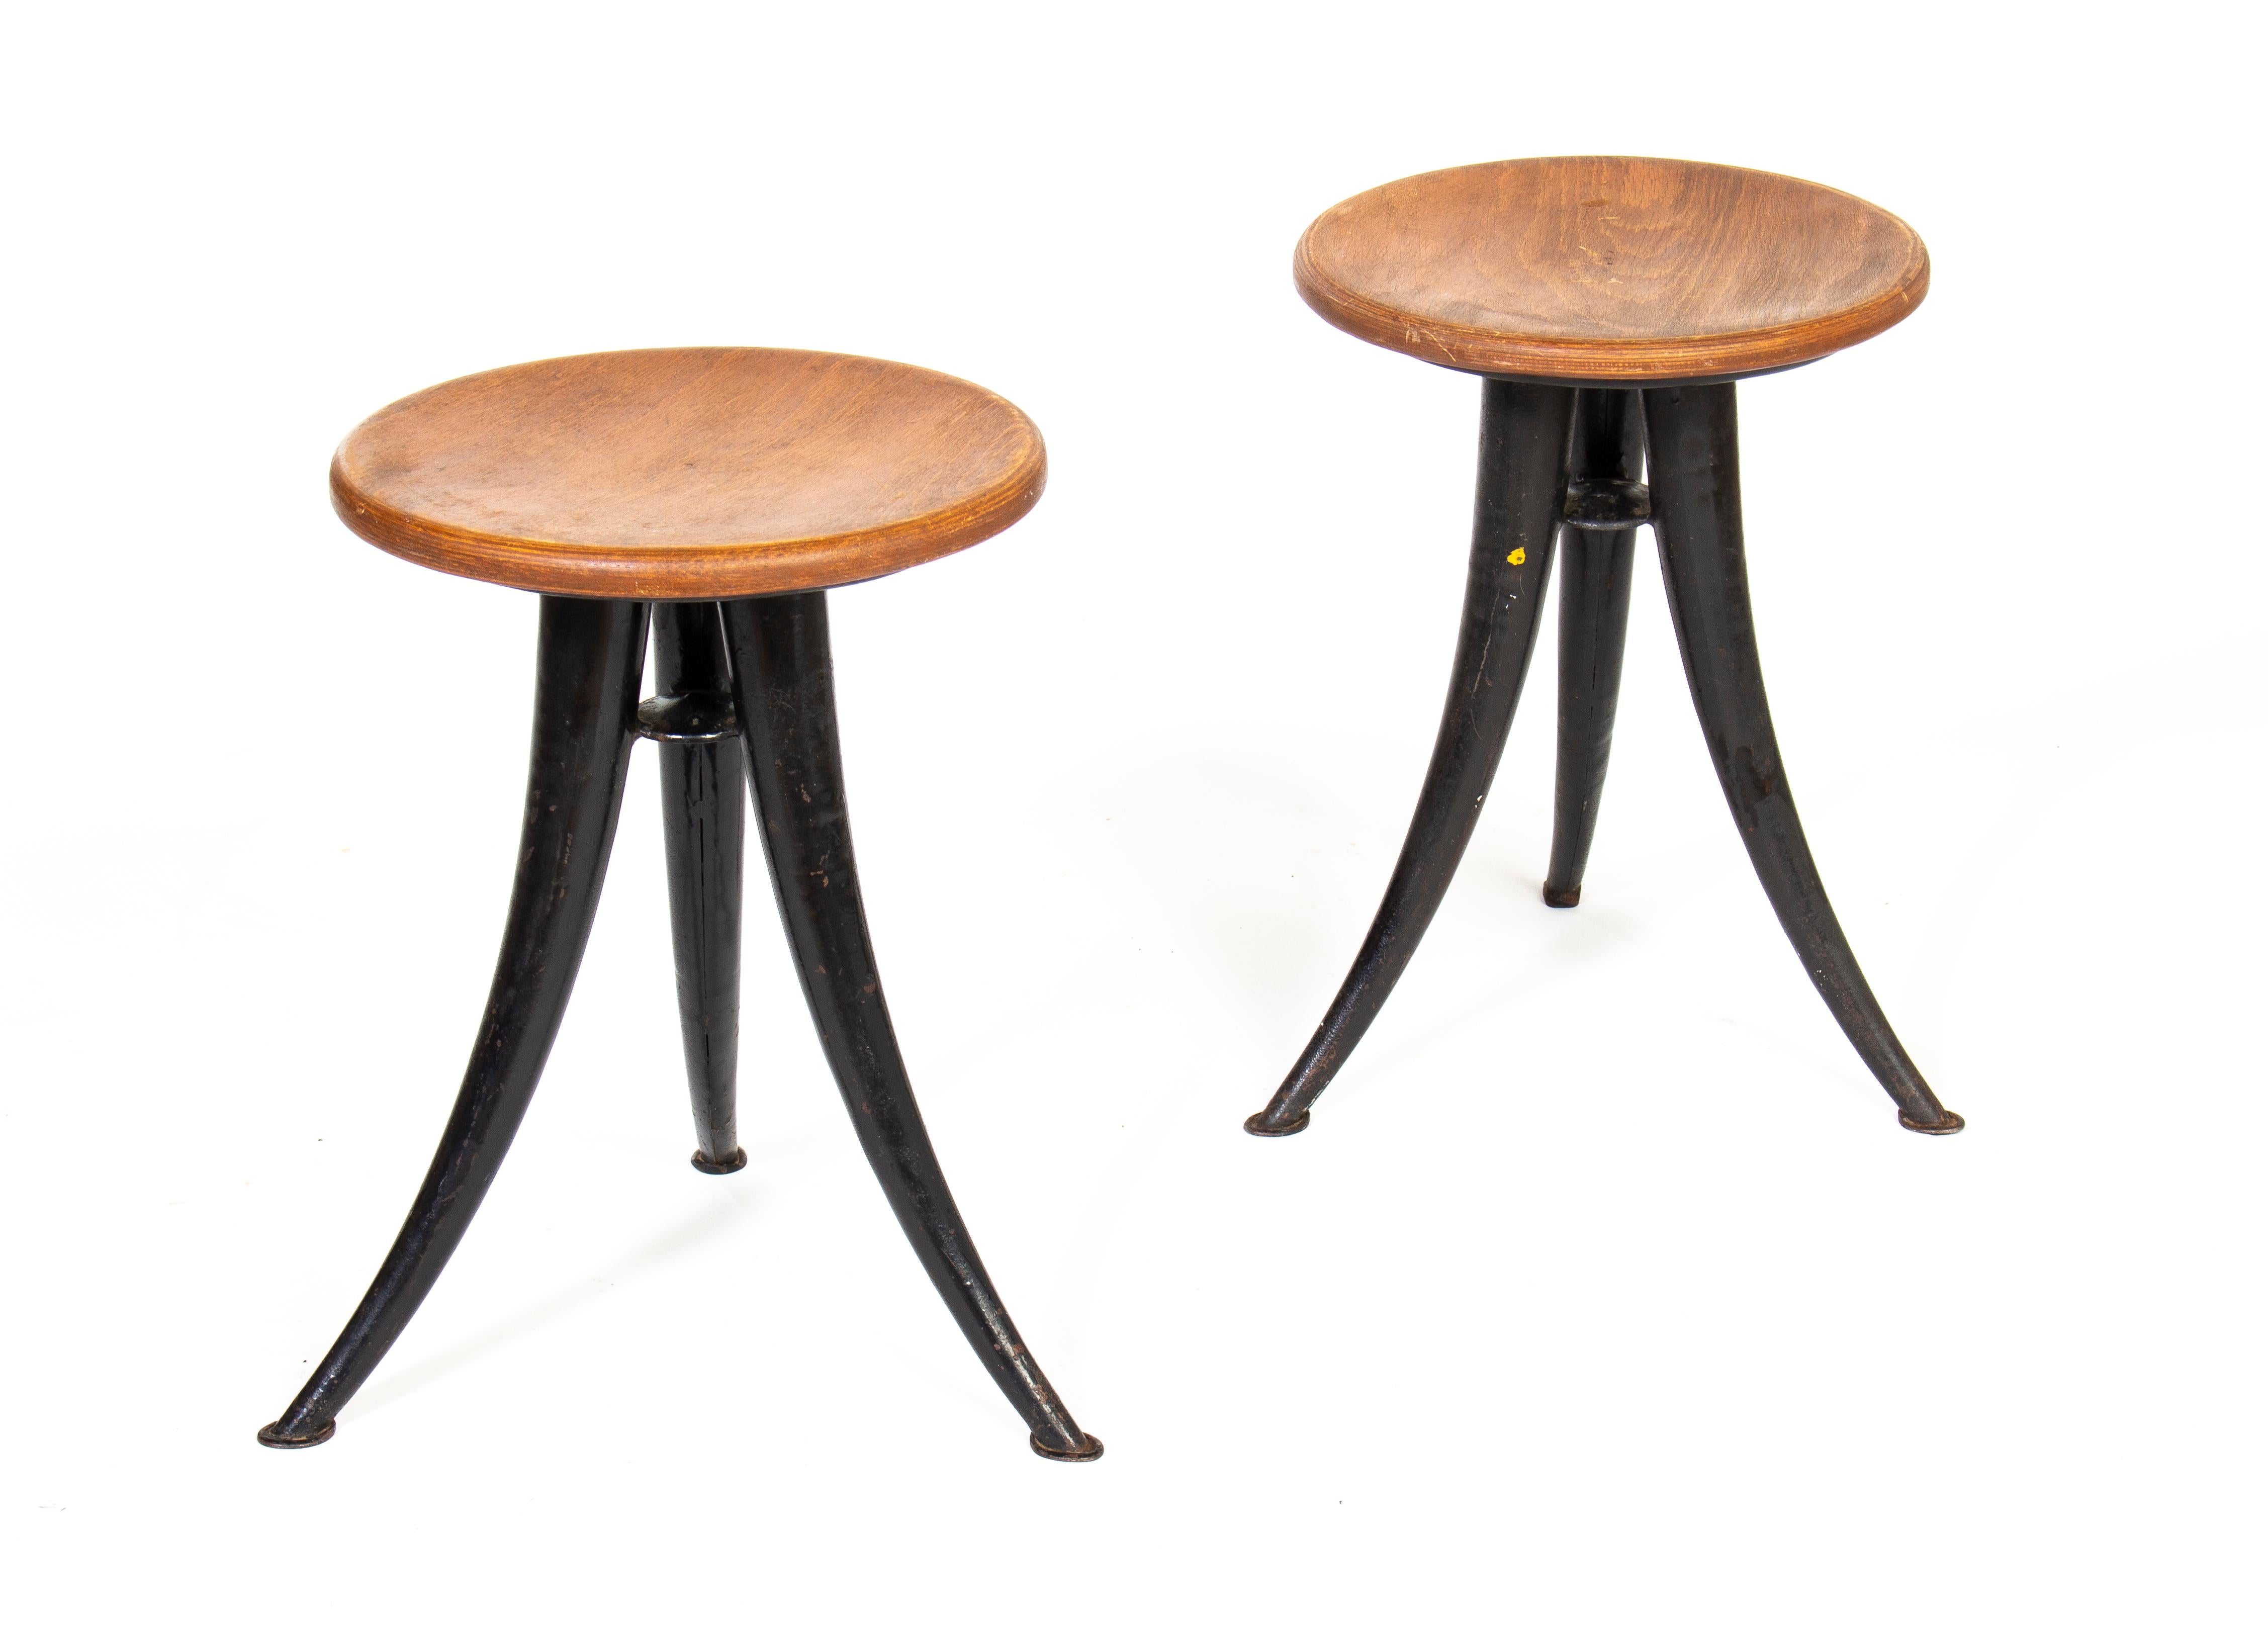 Art Déco Workshopstools designed by Frigyes Vogel atelier in Budapest. Manufactured in the 1930s.
The design of the three chair legs is realized with bent, welded steel and beech covered seating surface.